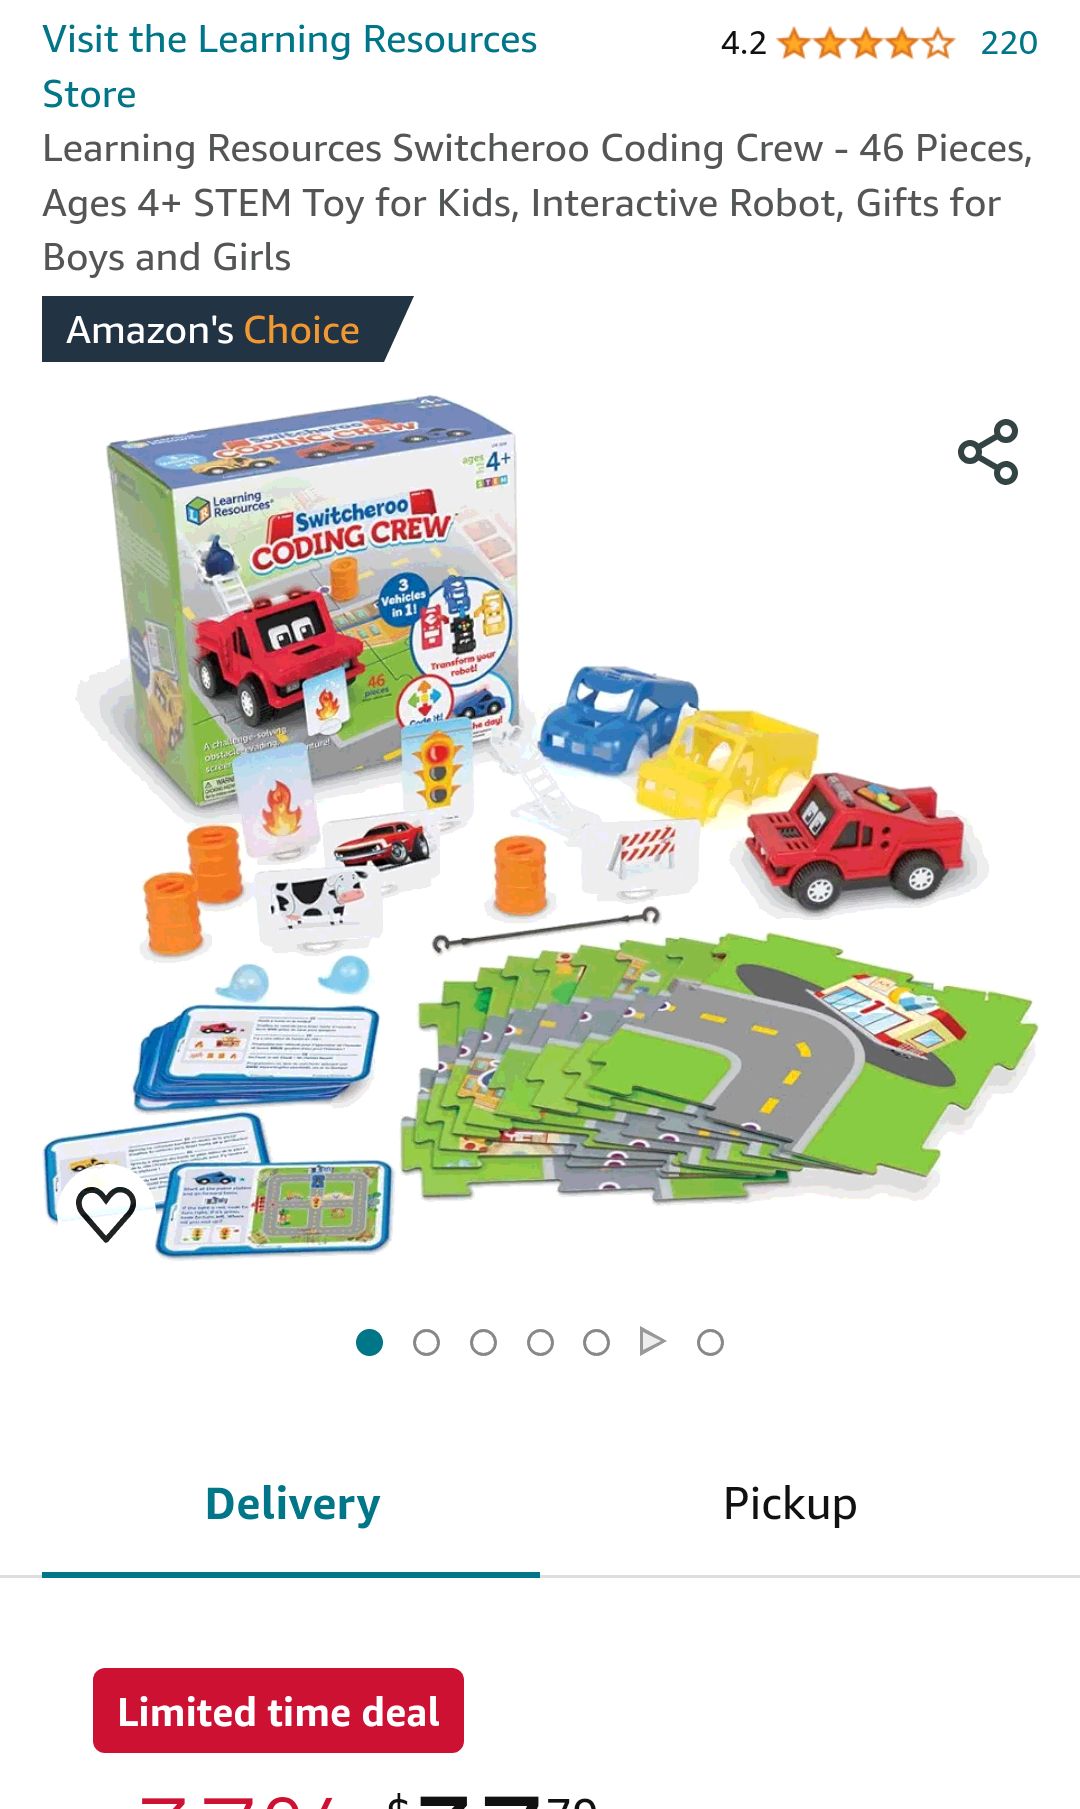 Learning Resources Switcheroo Coding Crew - 46 Pieces, Ages 4+ STEM Toy for Kids, Interactive Robot, Gifts for Boys and Girls : Toys & Games